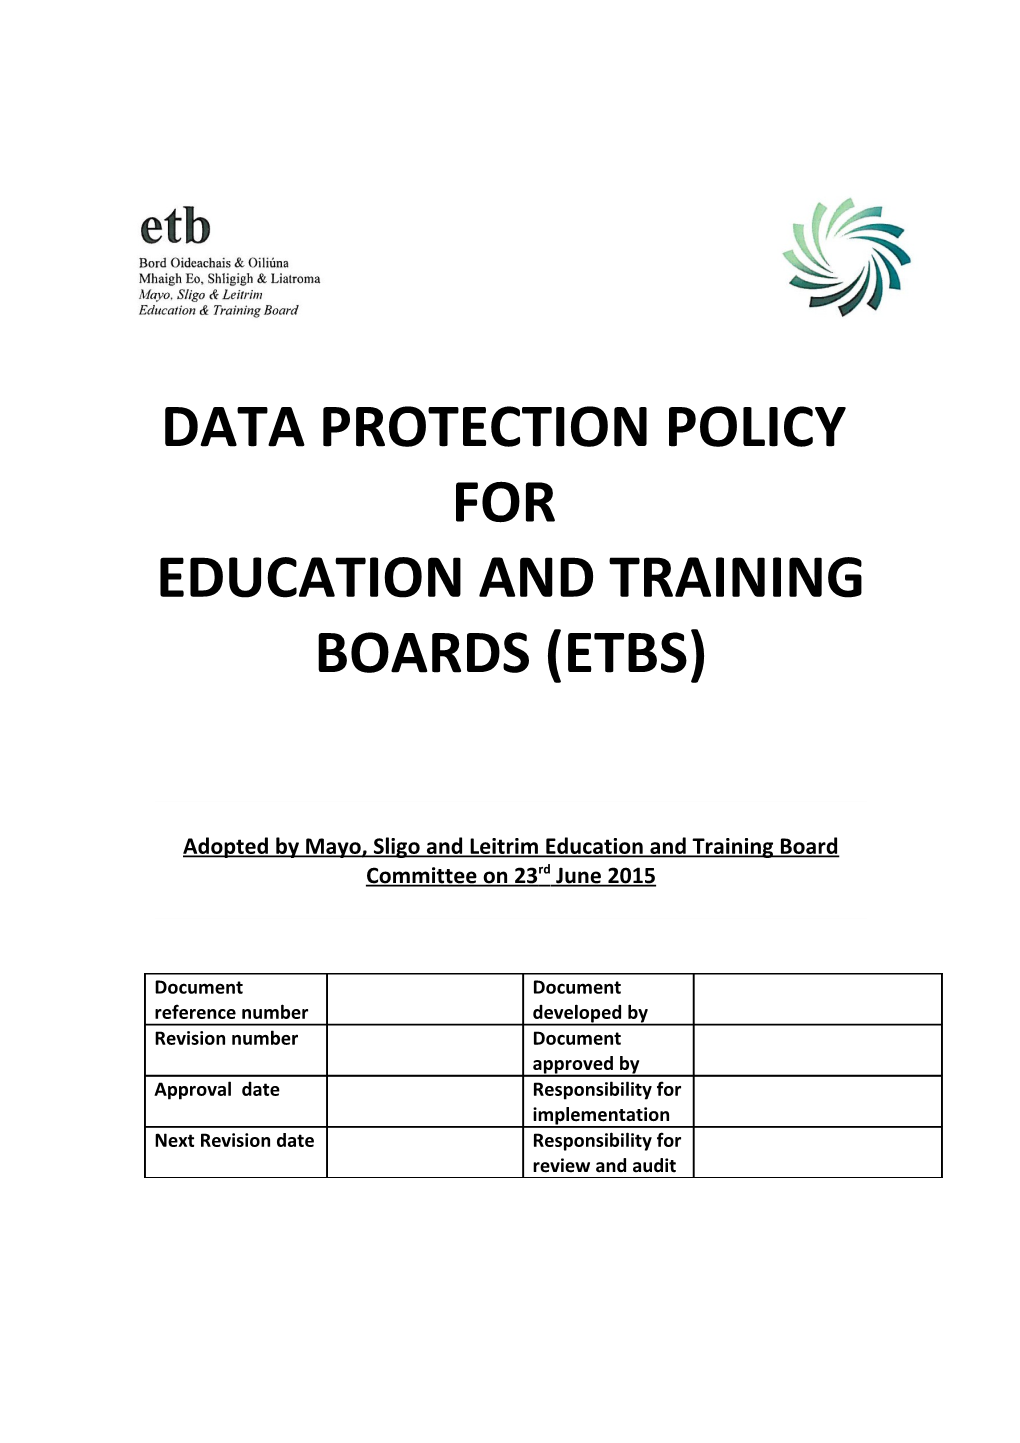 Adopted by Mayo, Sligo and Leitrim Education and Training Board Committee on 23Rd June 2015